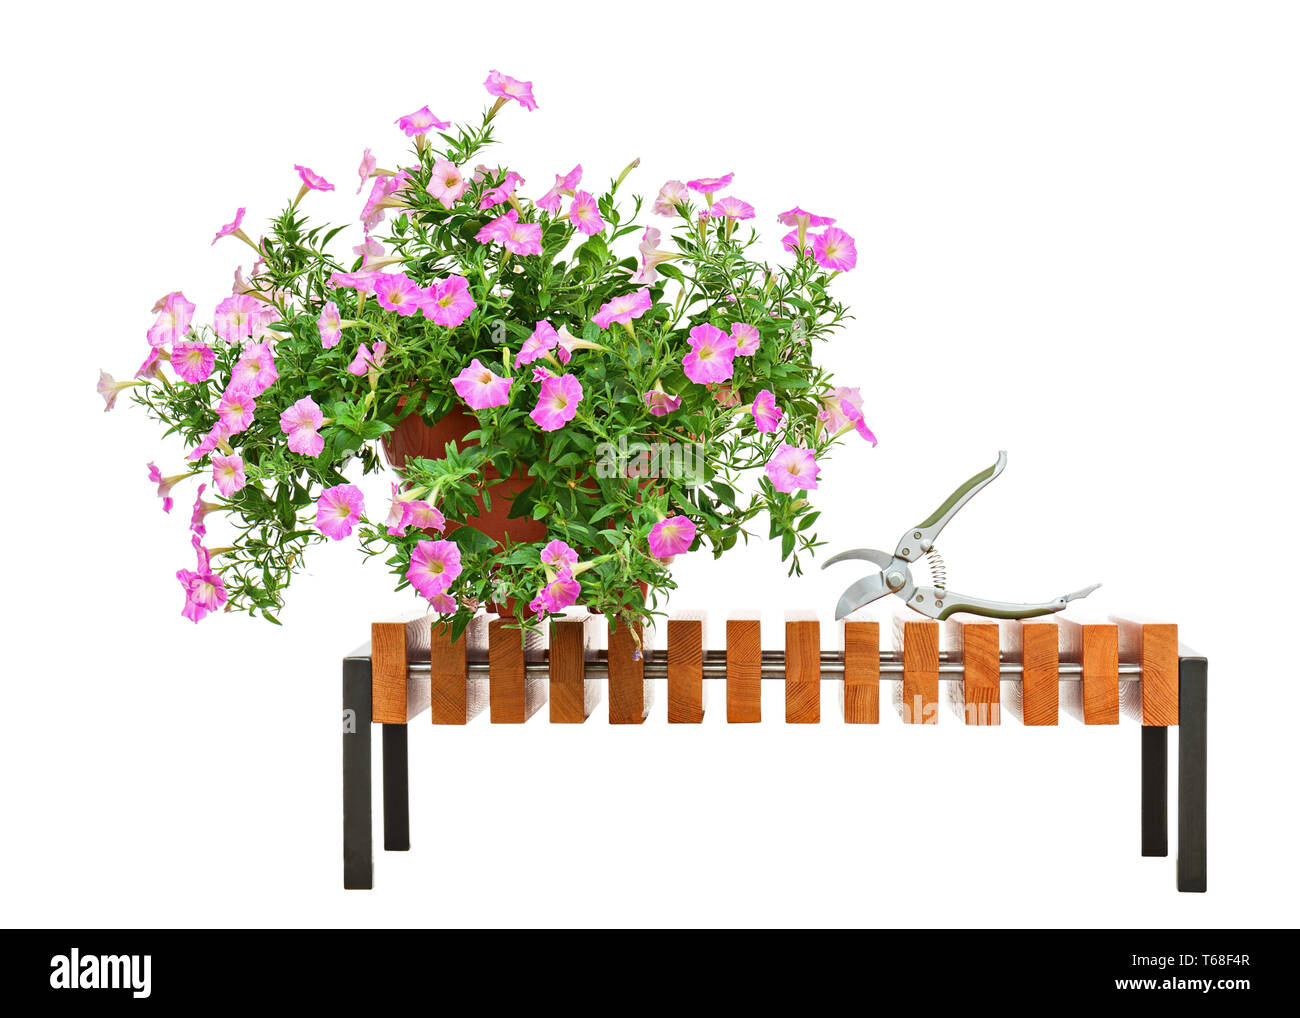 Pink petunia flowers on wooden bench isolated on white background. Stock Photo